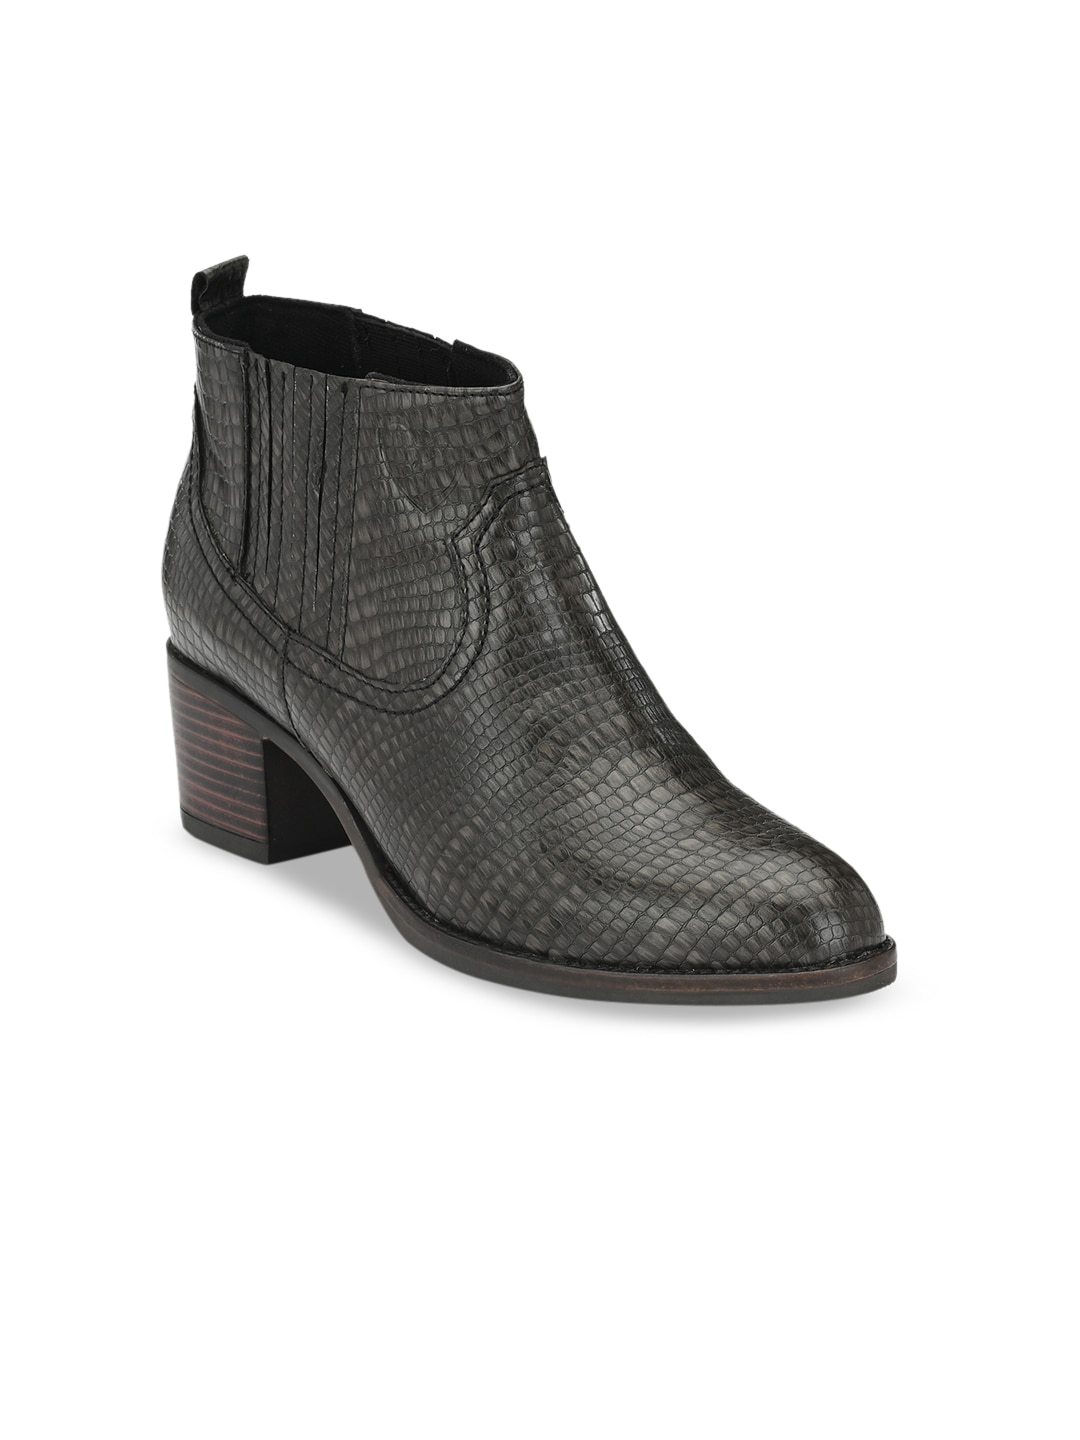 Delize Women Black Textured Heeled Mid-Top Boots Price in India